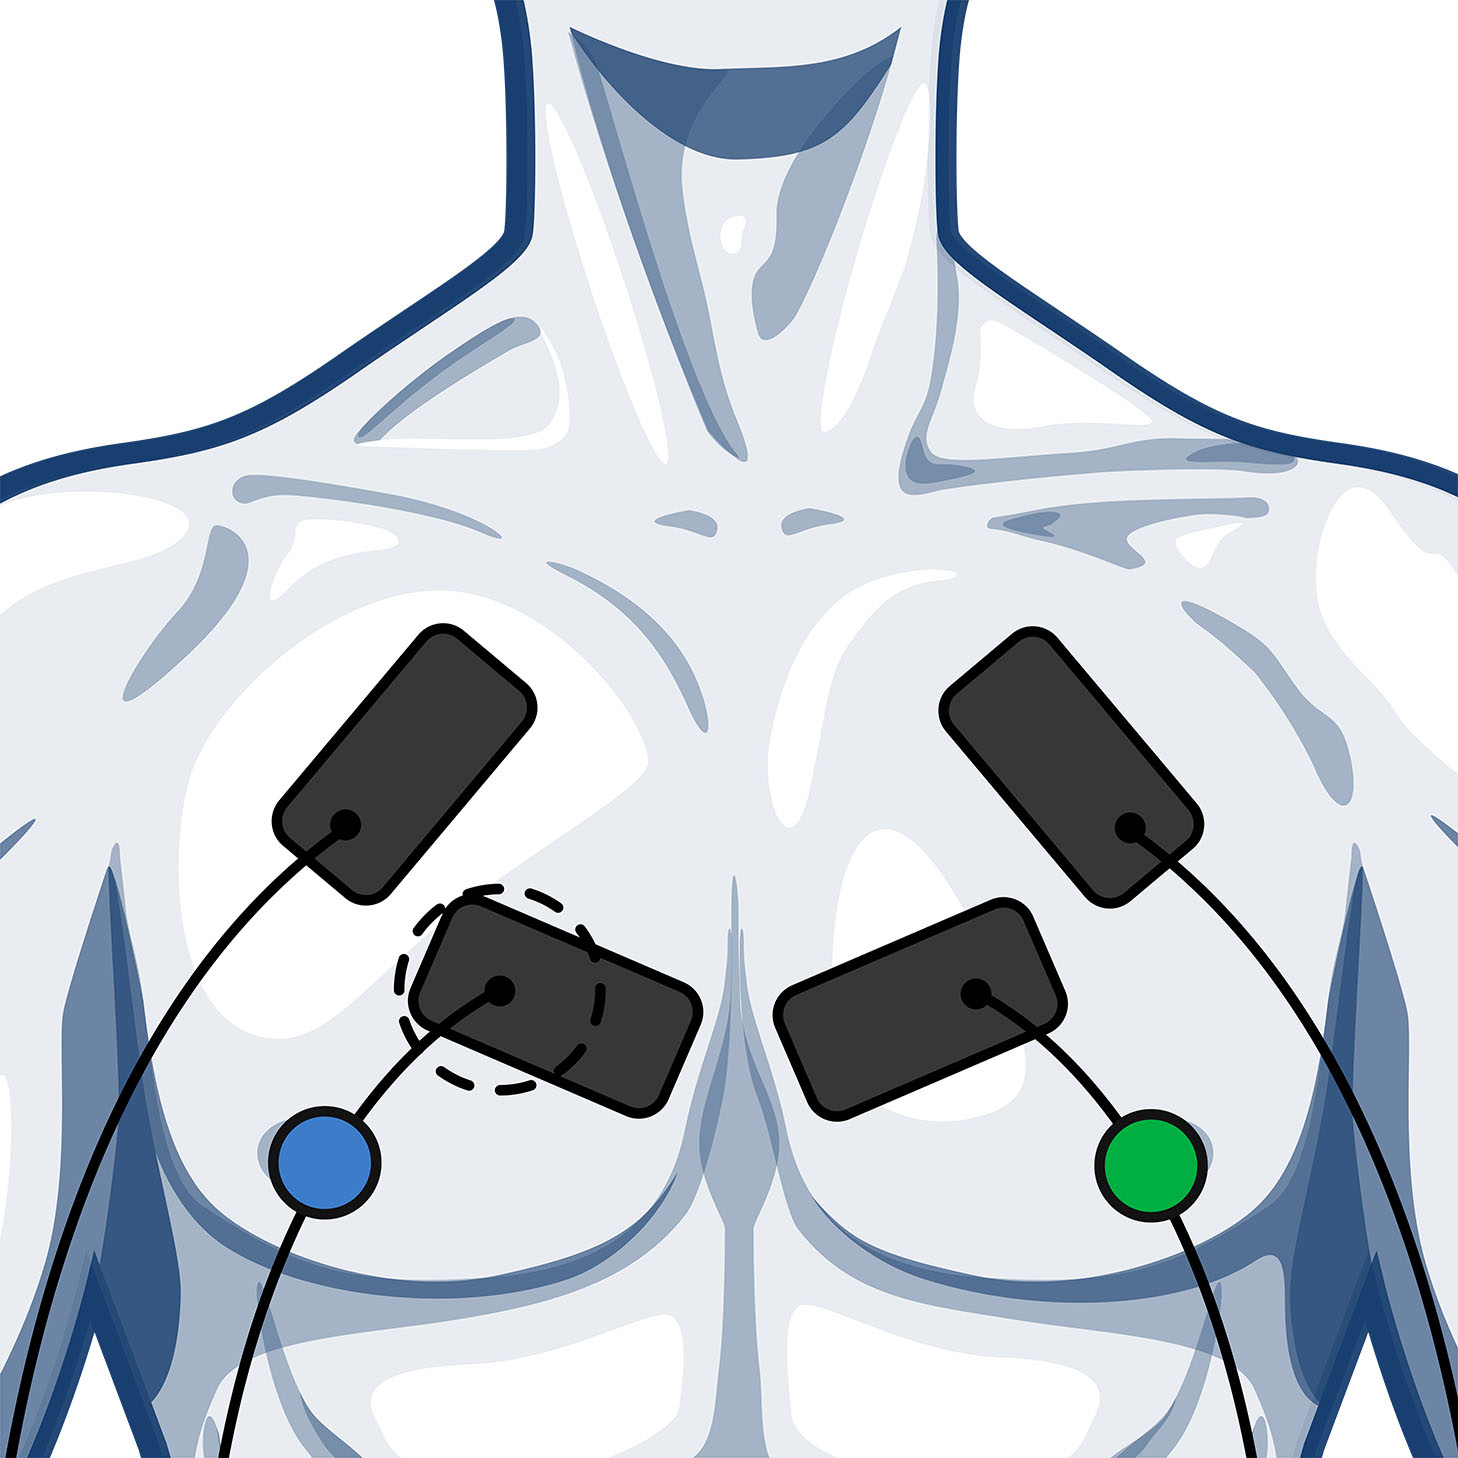 https://www.compex.com/media/wysiwyg/compex-eu/cms/electrode-placement/men/Wired-Chest.jpg